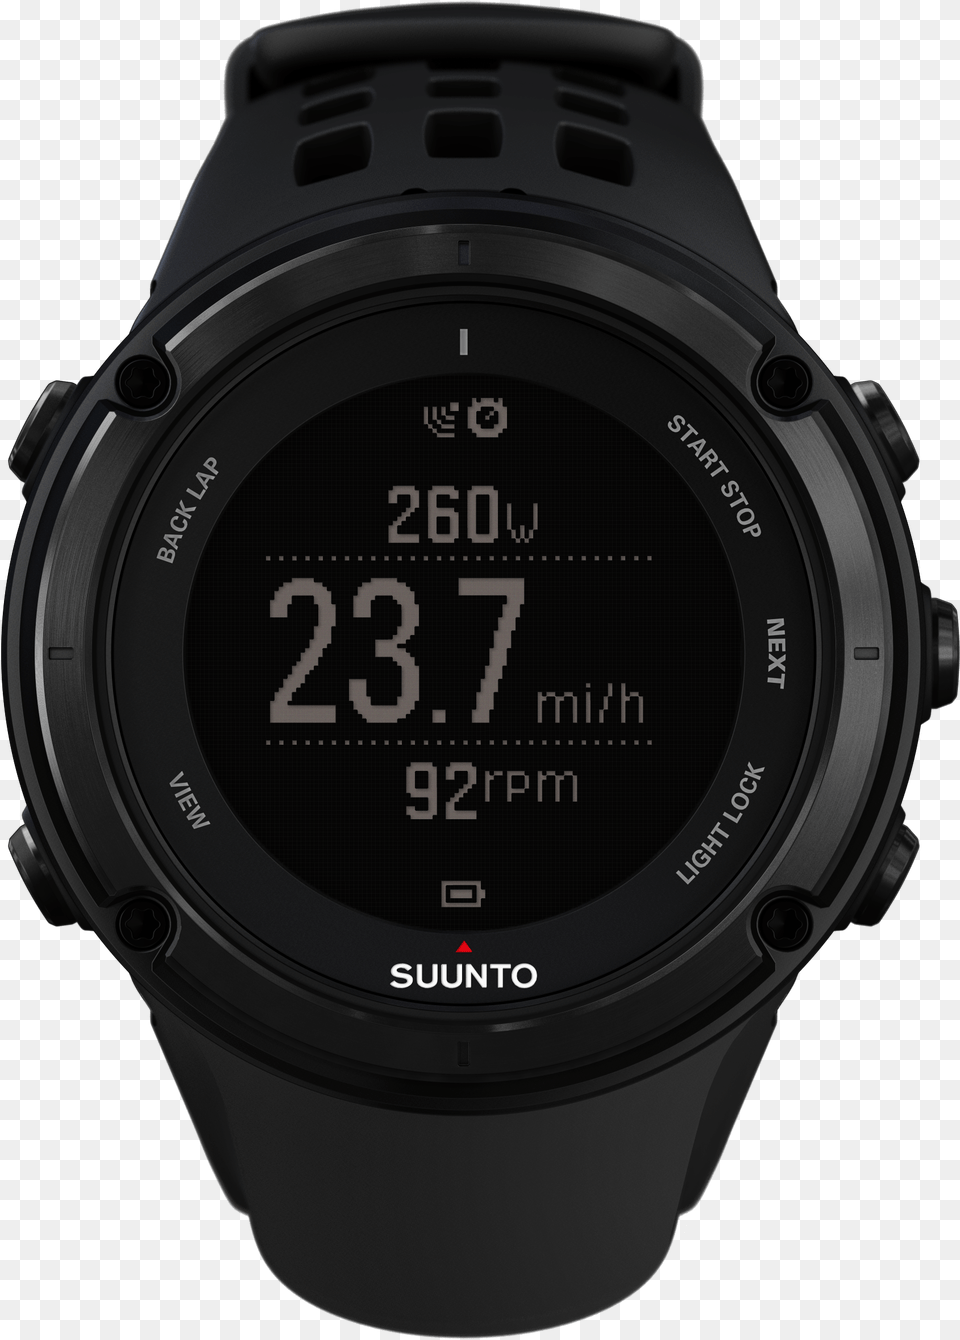 Perspective Ambit 2 Perspective Watch For Men For Gym, Wristwatch, Electronics, Camera, Body Part Free Png Download